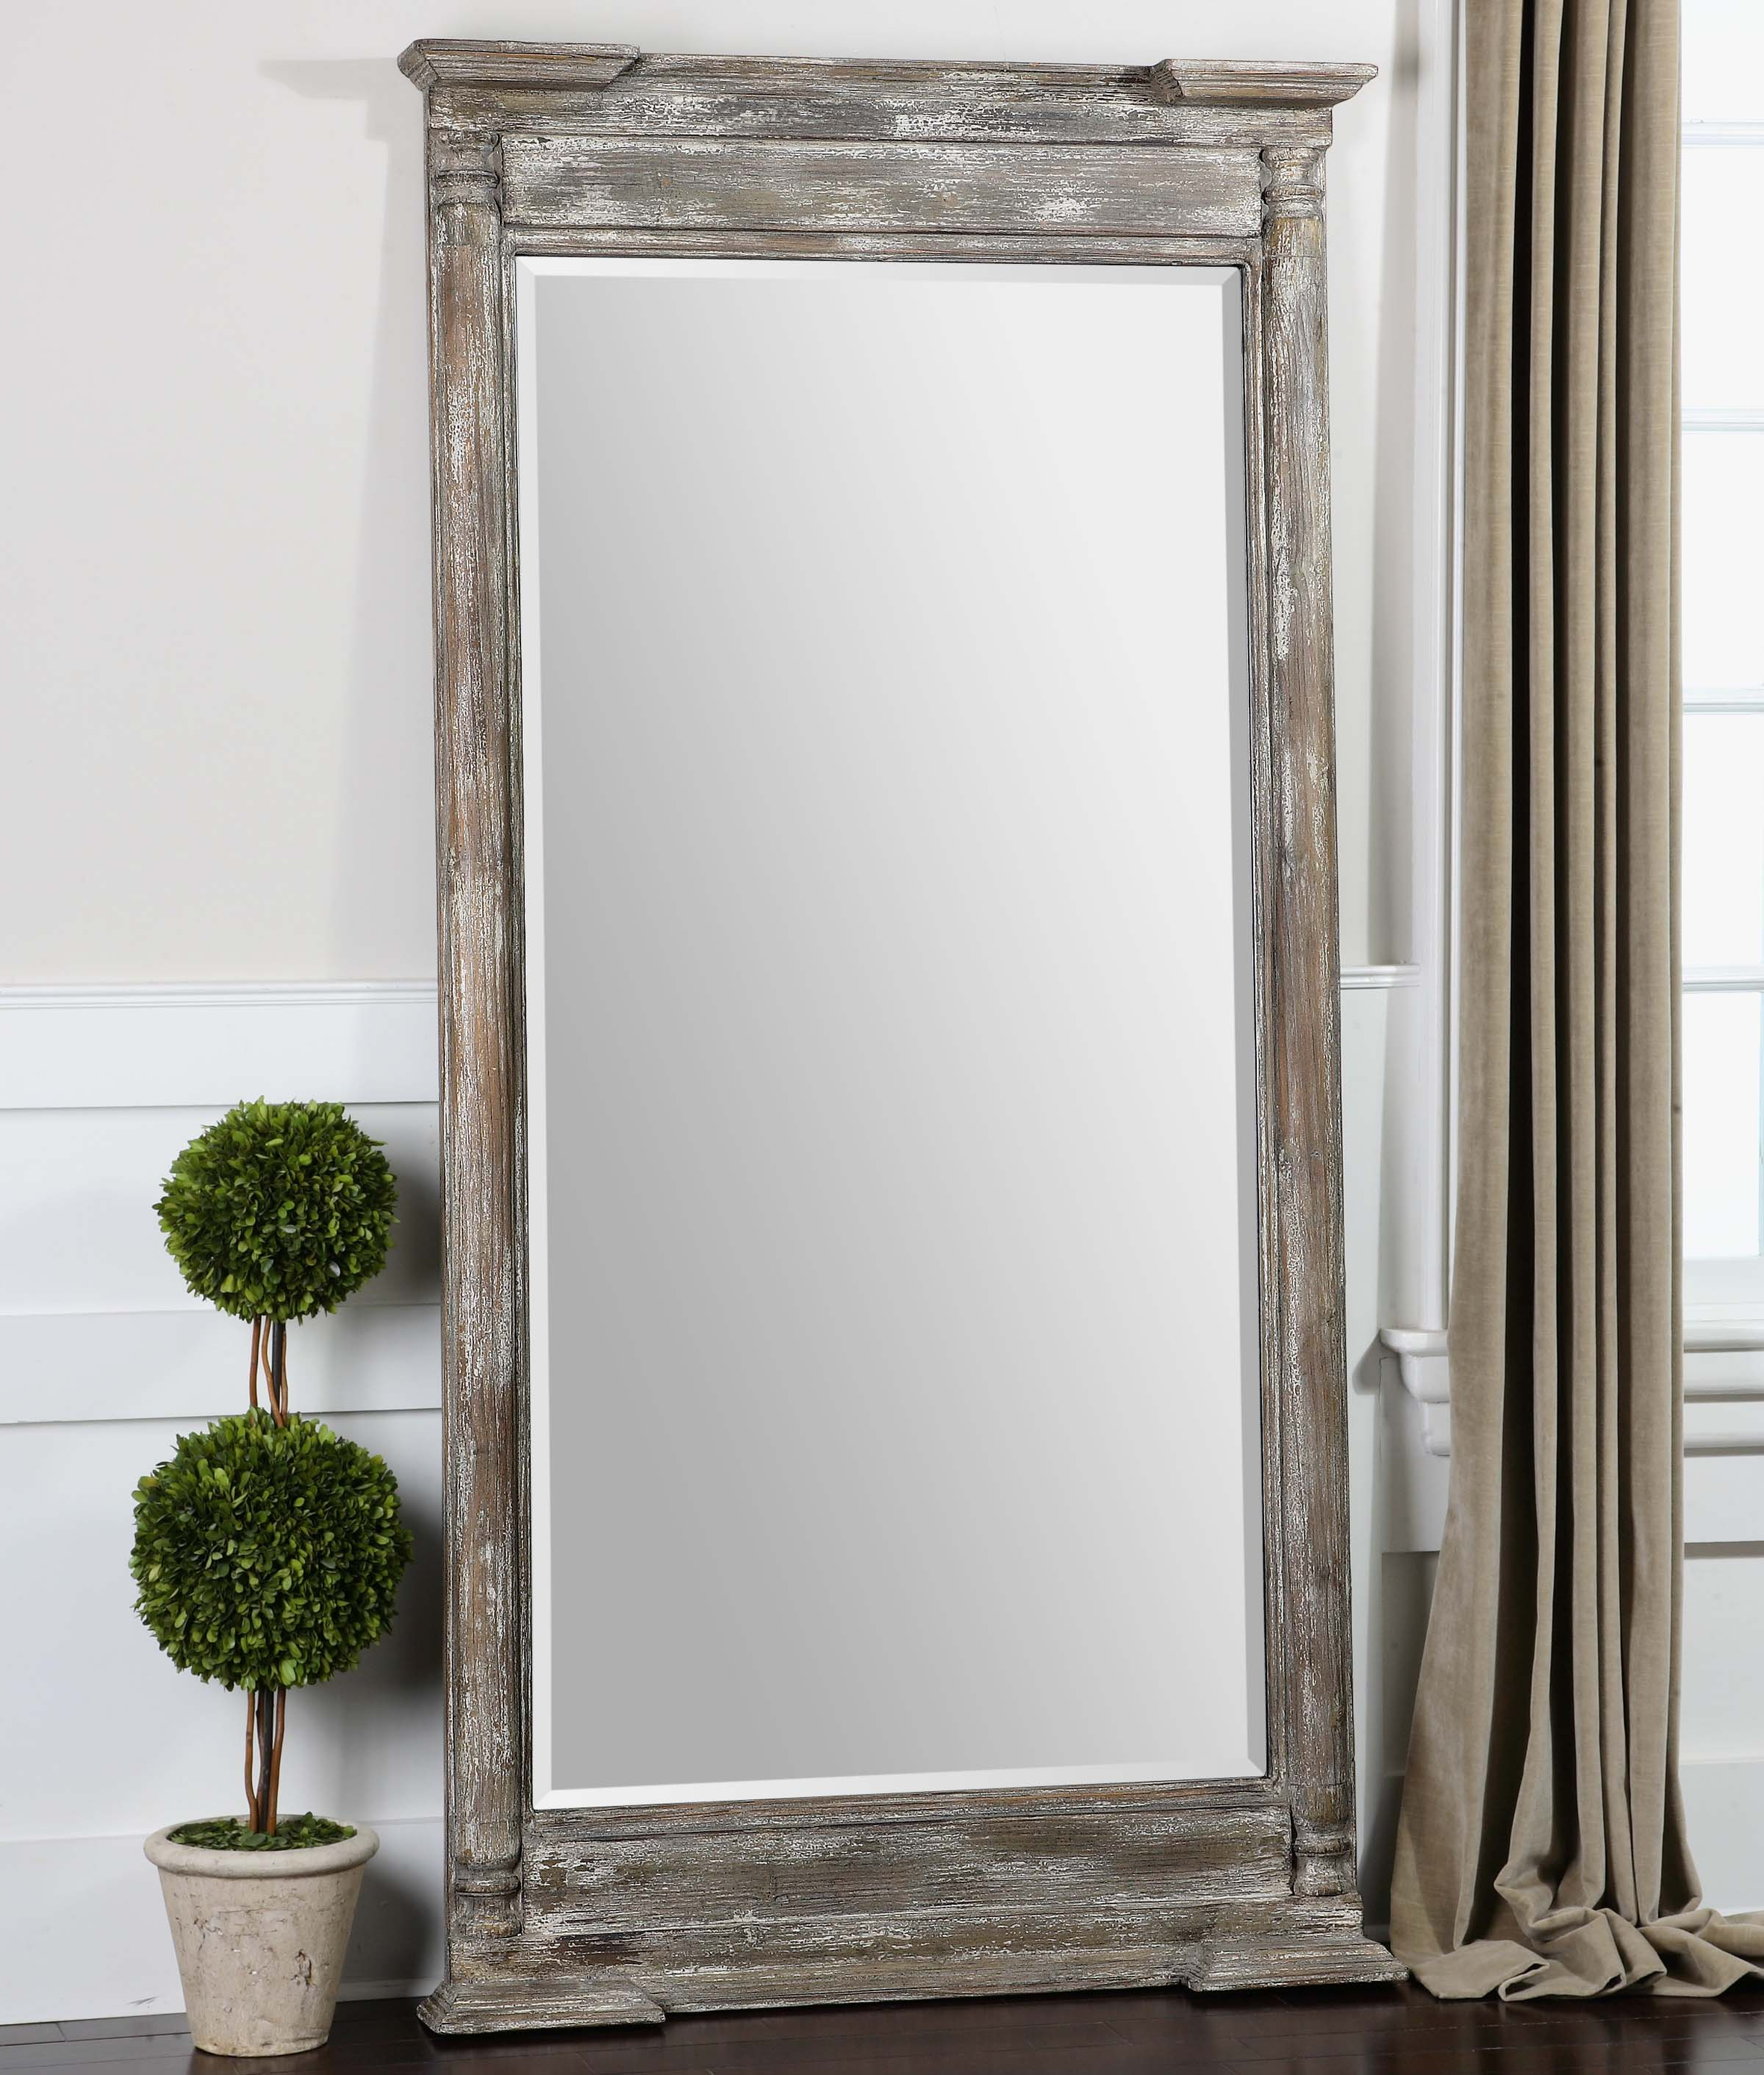 Valcellina Wooden Leaner Mirror - Hudsonhill Foundry